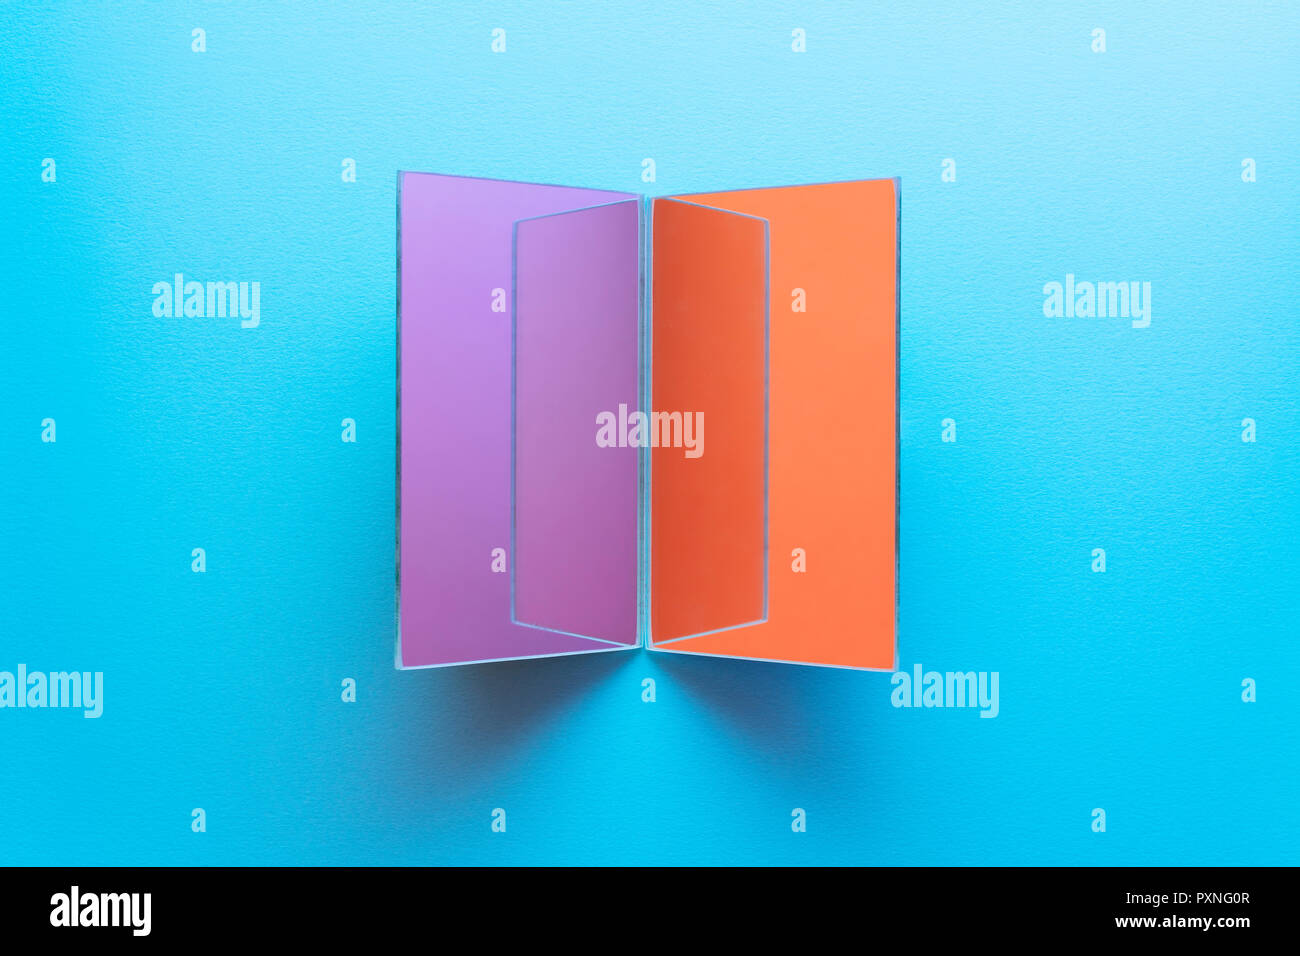 Rectangle shaped mirrors on blue background Stock Photo